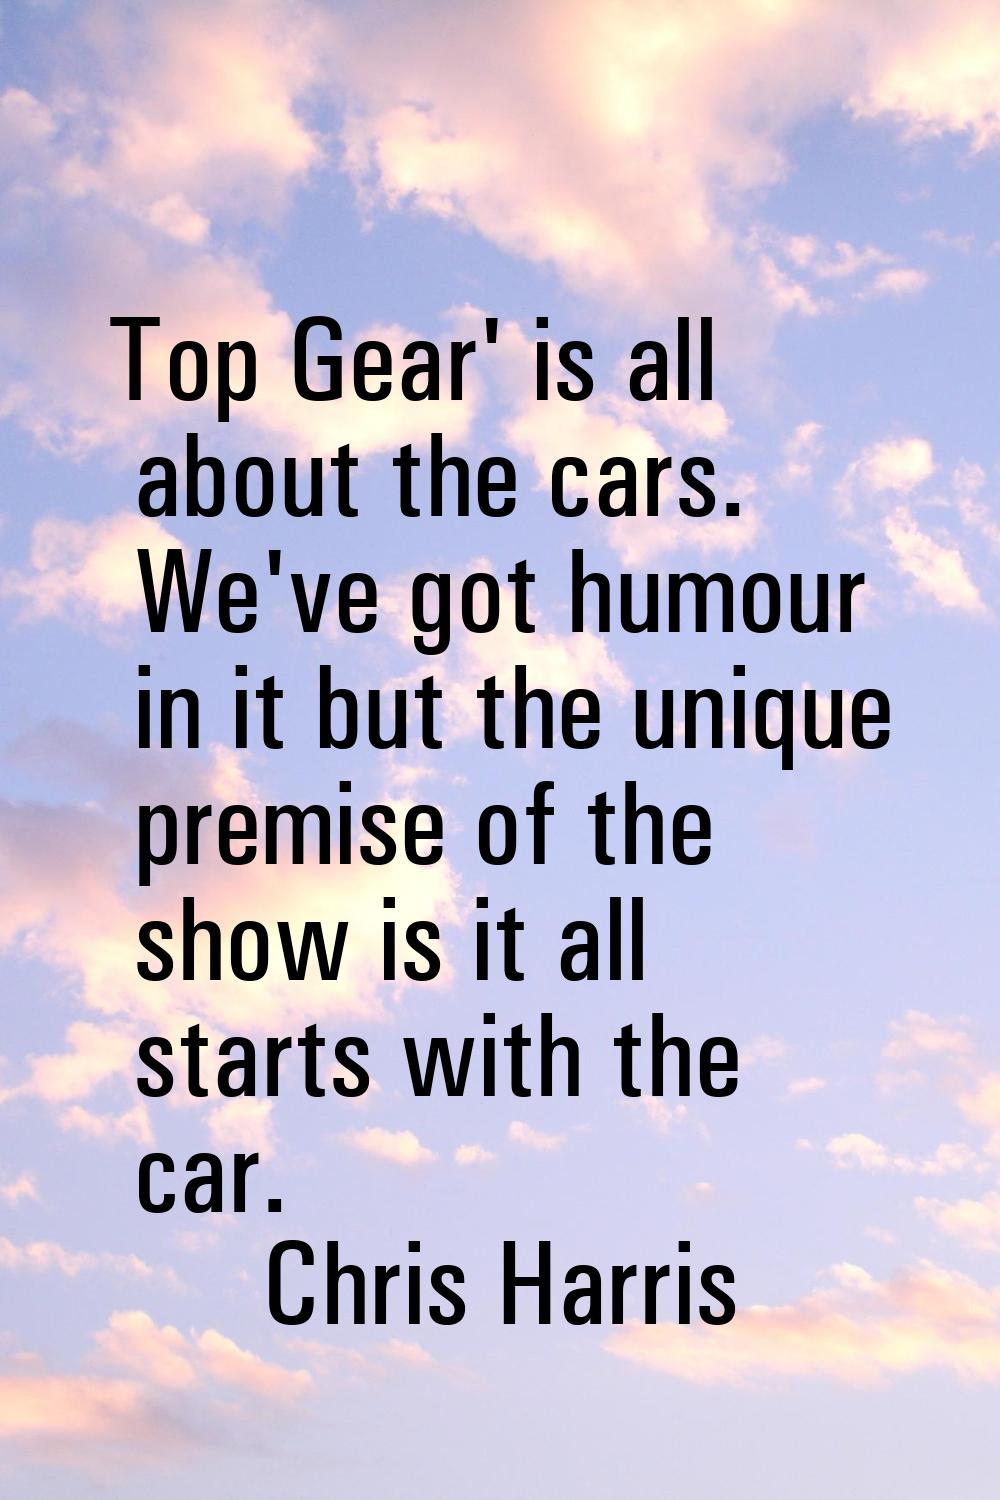 Top Gear' is all about the cars. We've got humour in it but the unique premise of the show is it al